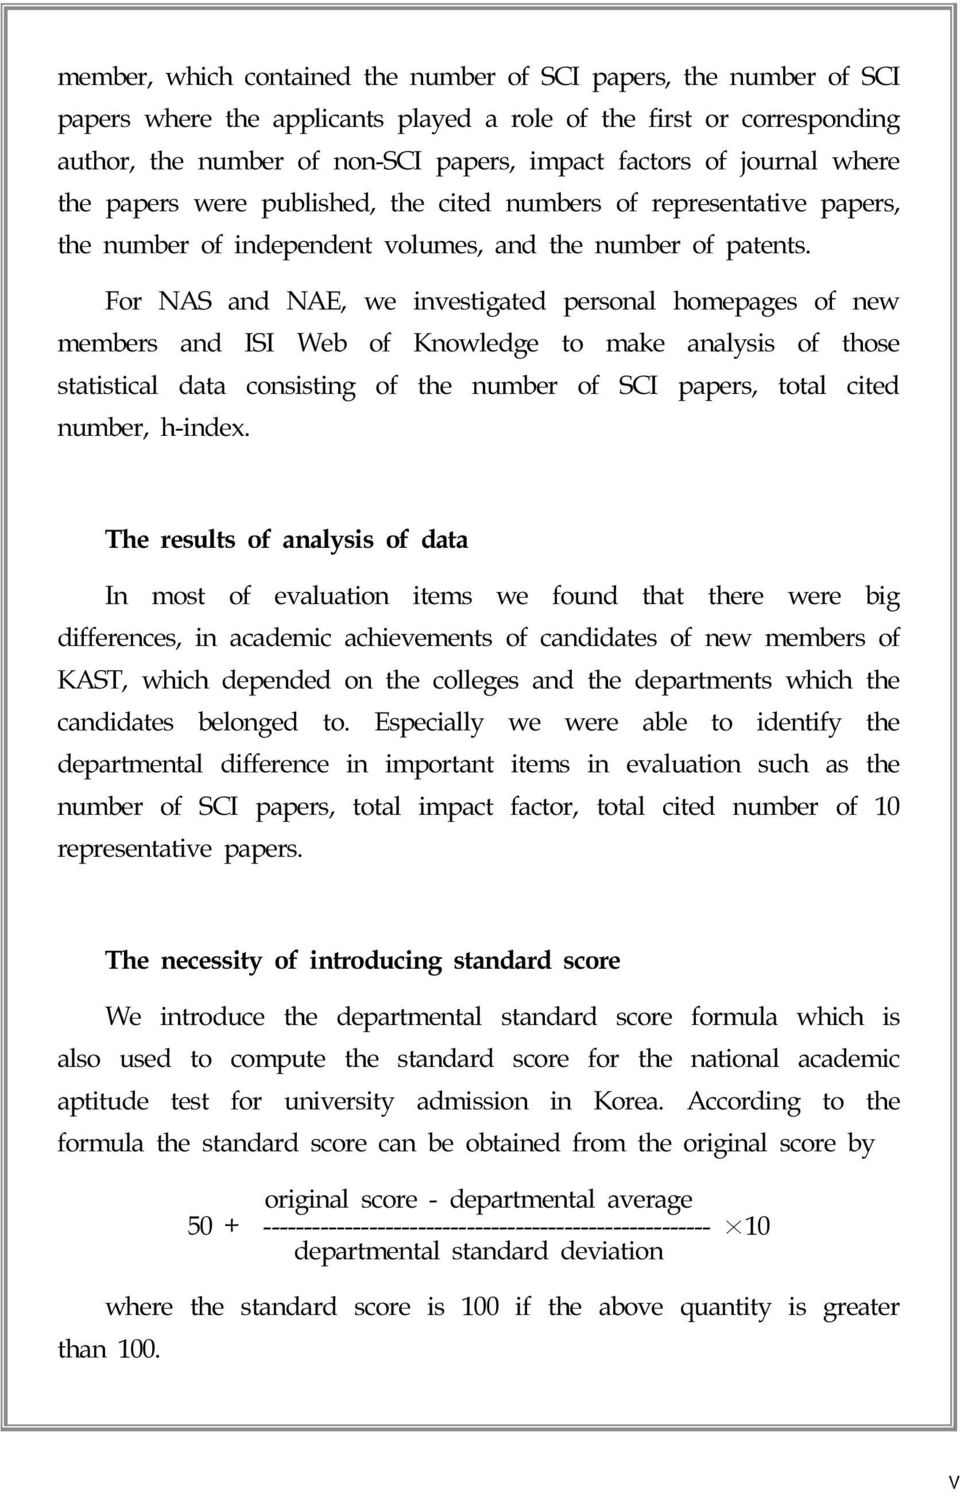 For NAS and NAE, we investigated personal homepages of new members and ISI Web of Knowledge to make analysis of those statistical data consisting of the number of SCI papers, total cited number,